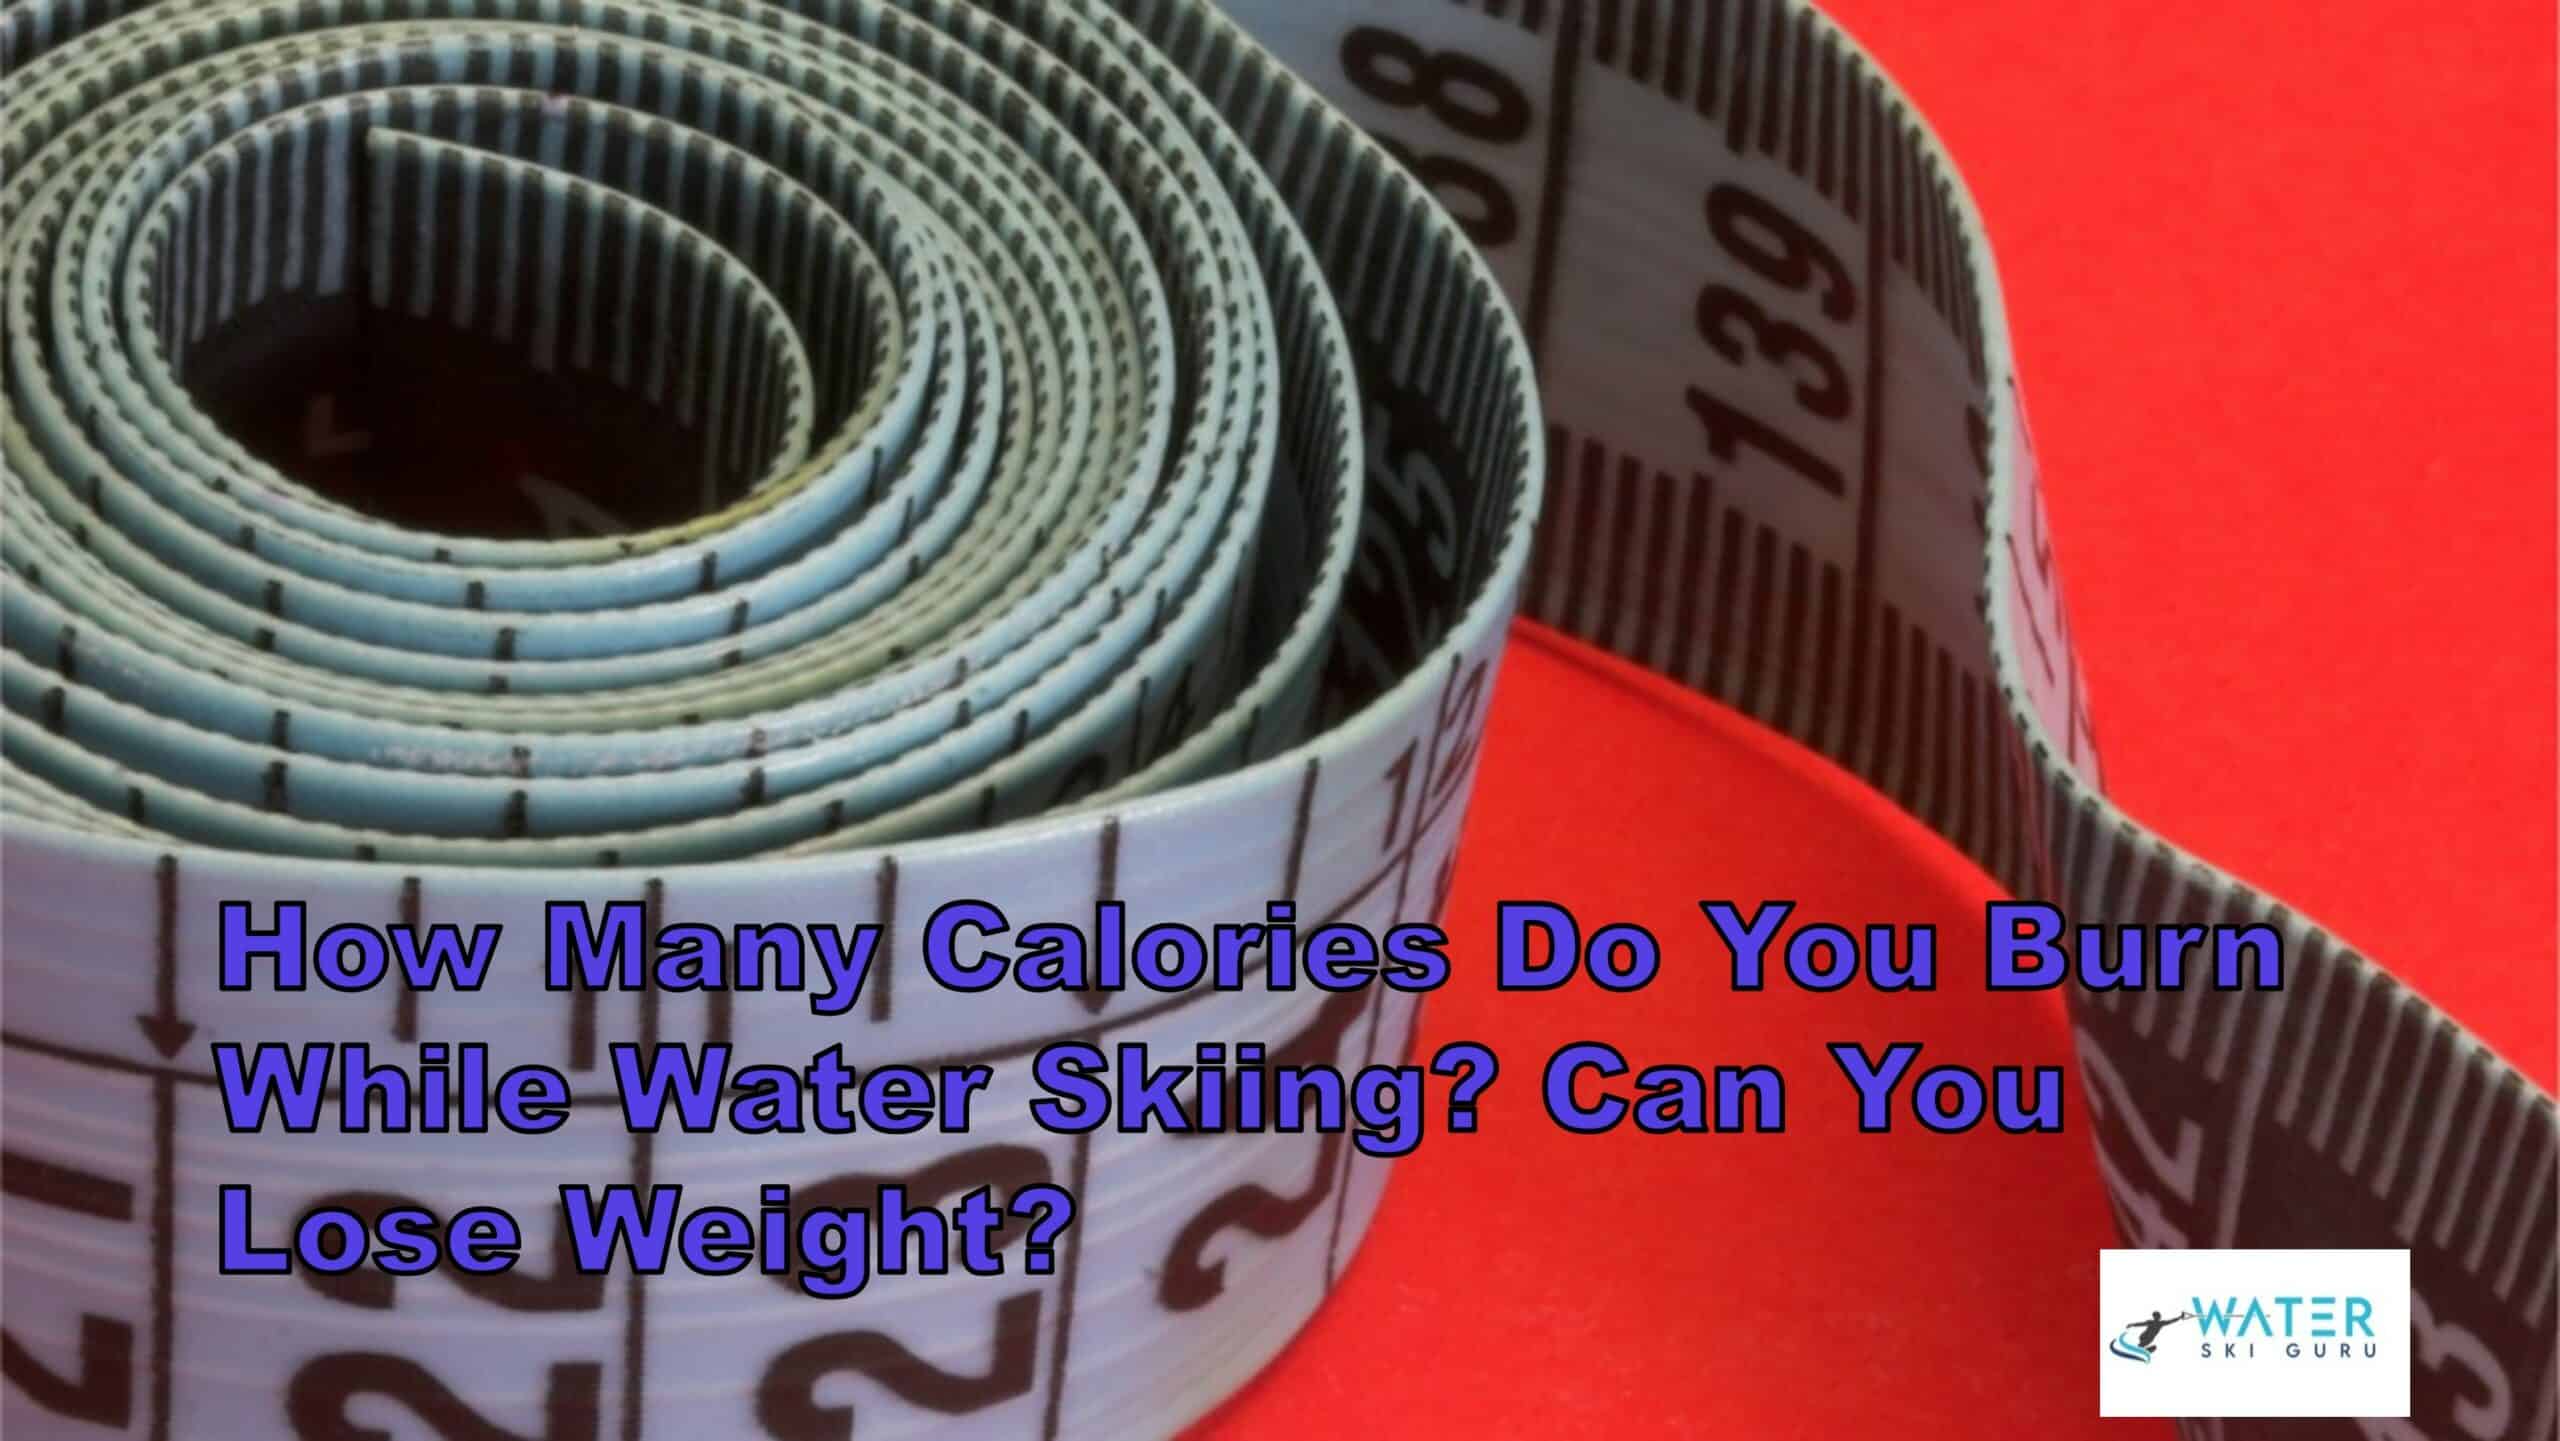 How Many Calories Do You Burn While Water Skiing Can You Lose Weight